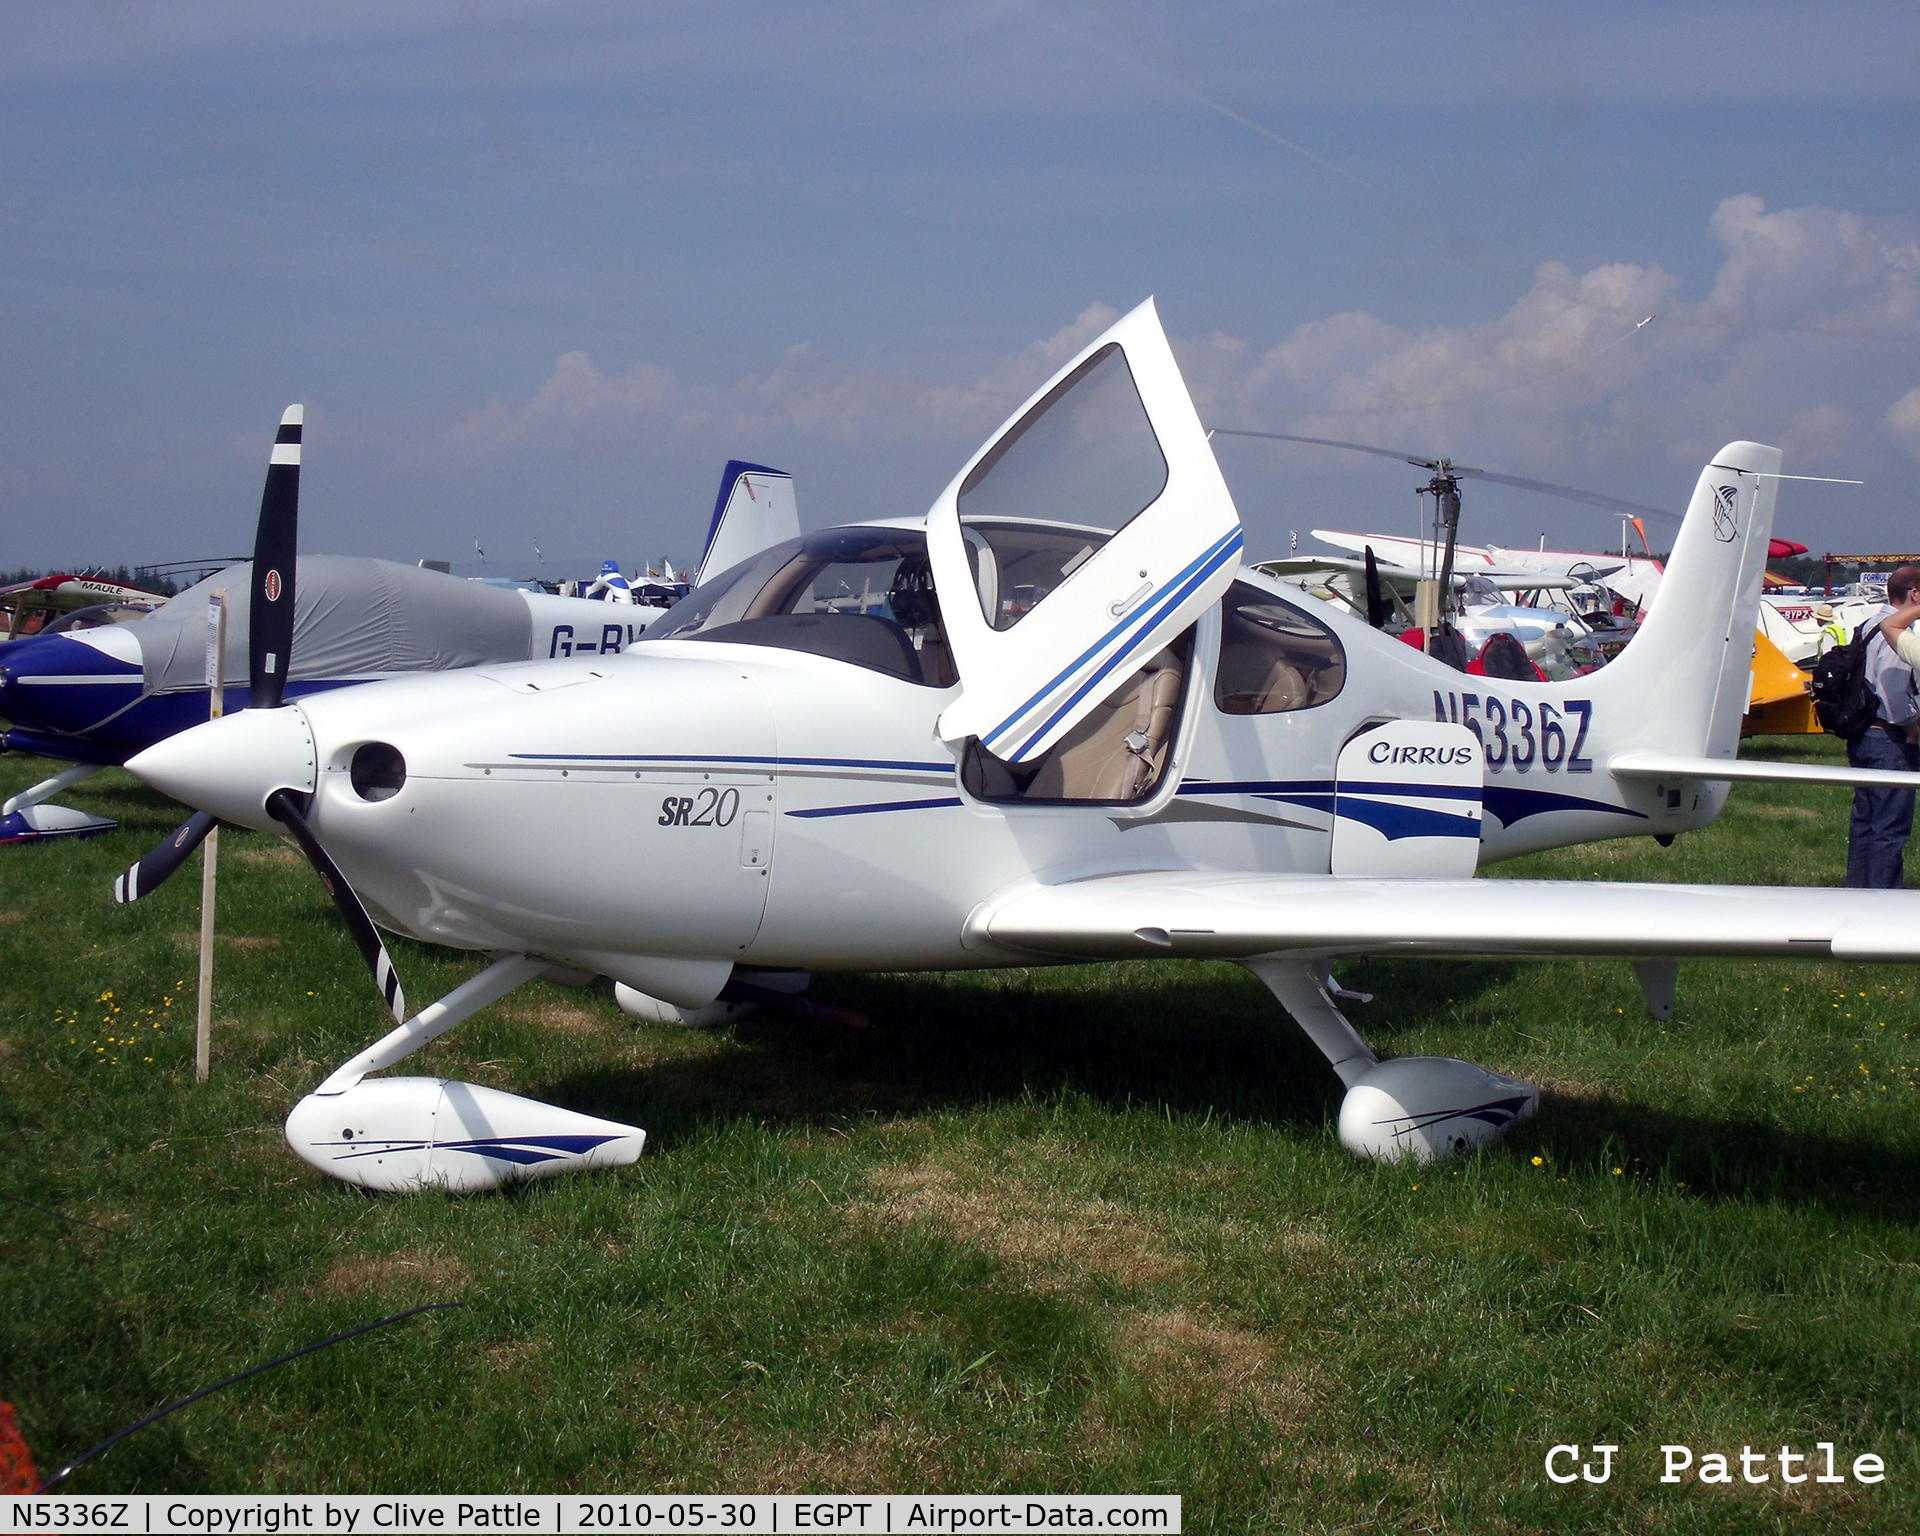 N5336Z, 2004 Cirrus SR20 C/N 1413, On display in the static park during the Heart of Scotland Airshow held at Perth (Scone) airfield EGPT